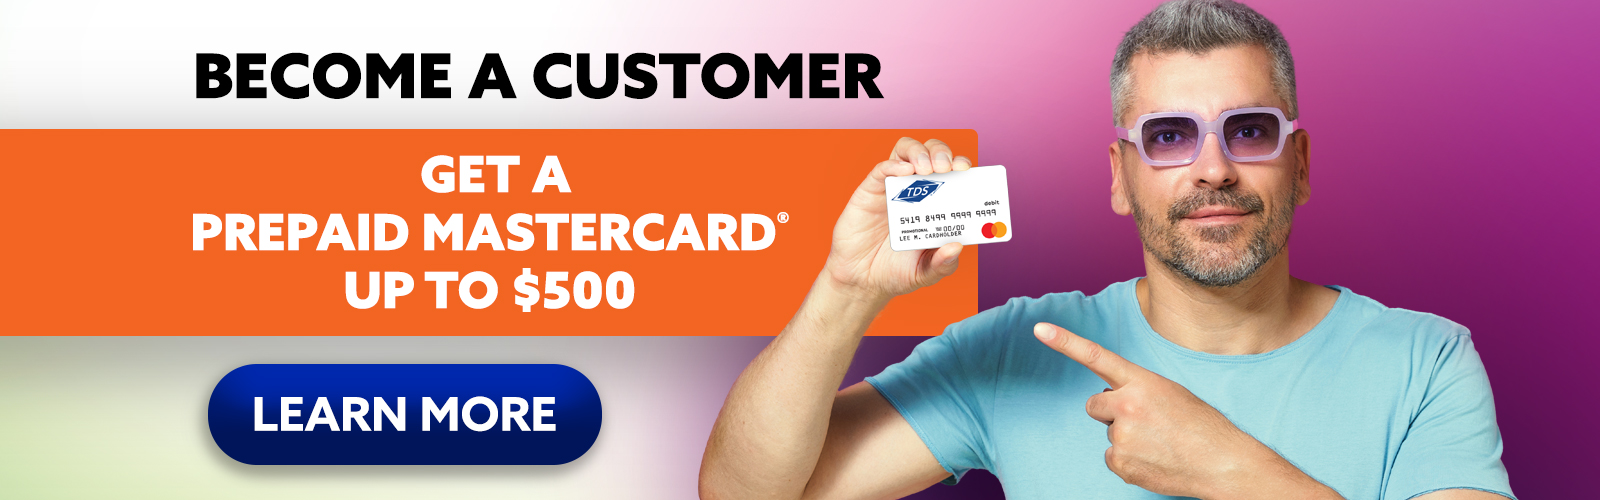 Click this image to learn more about getting a prepaid mastercard up to $500.